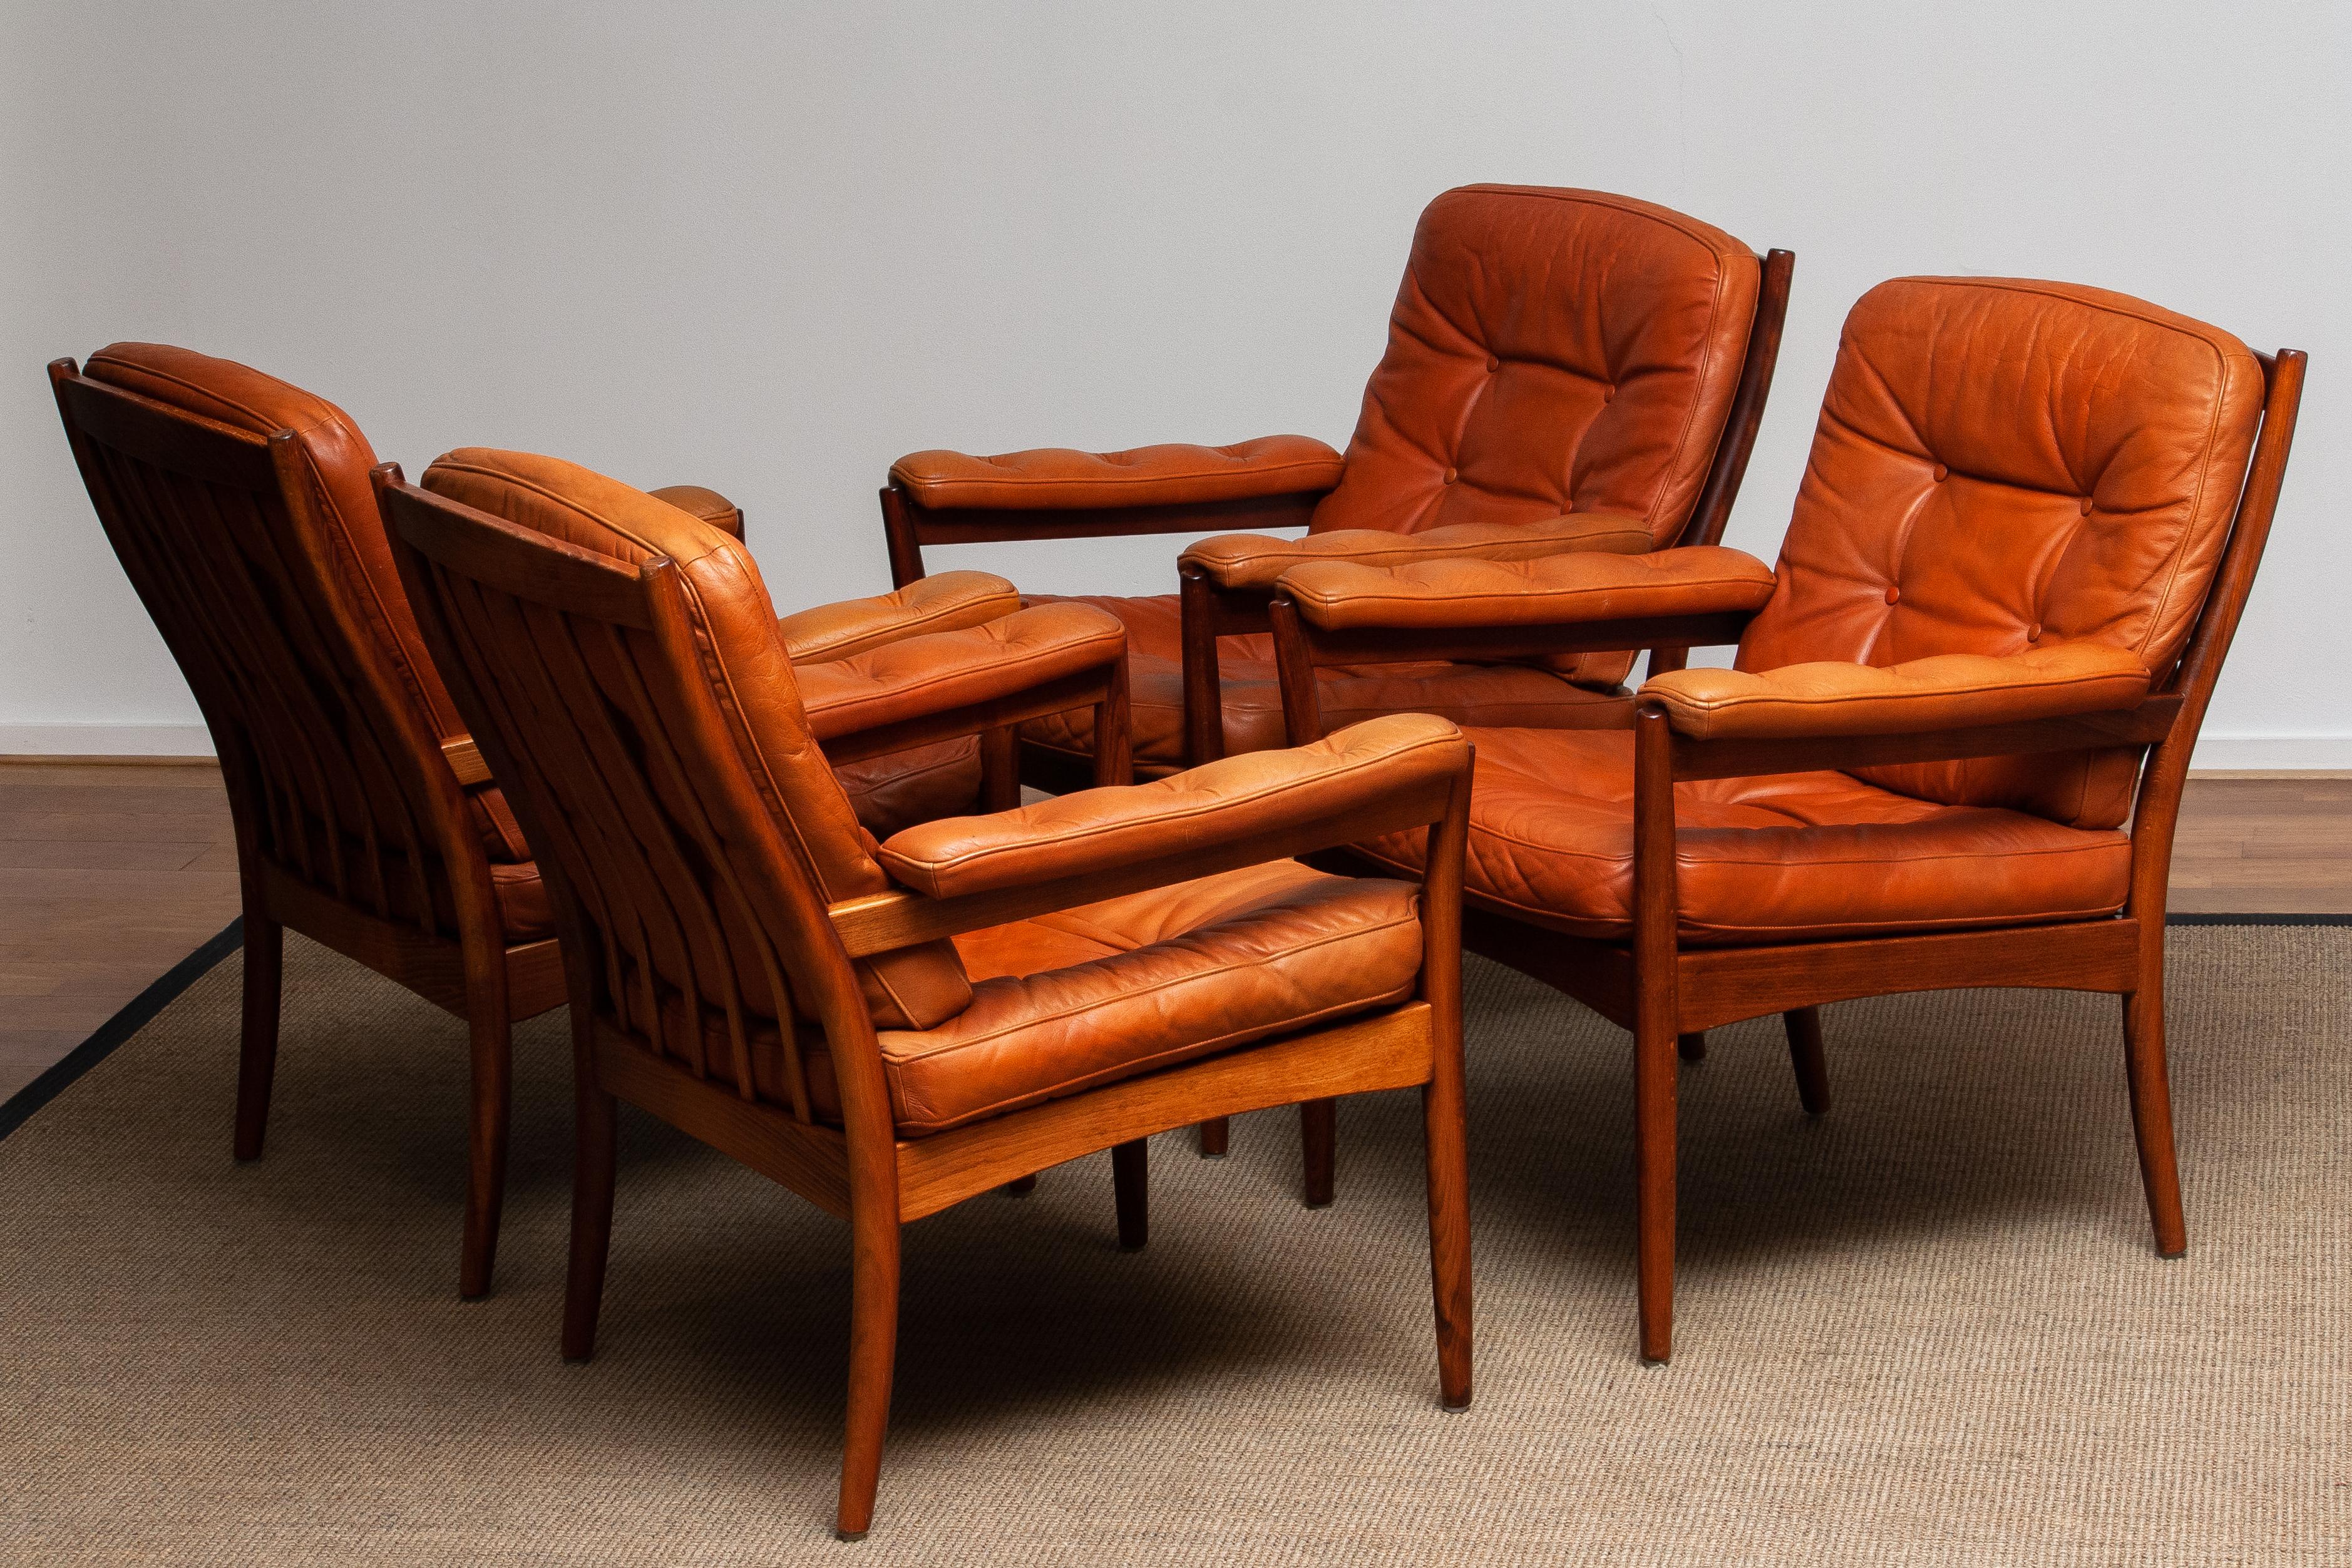 Mid-20th Century 1960s, Four Congac Leather Easy Chairs Made by Göte Design Nässjö Sweden